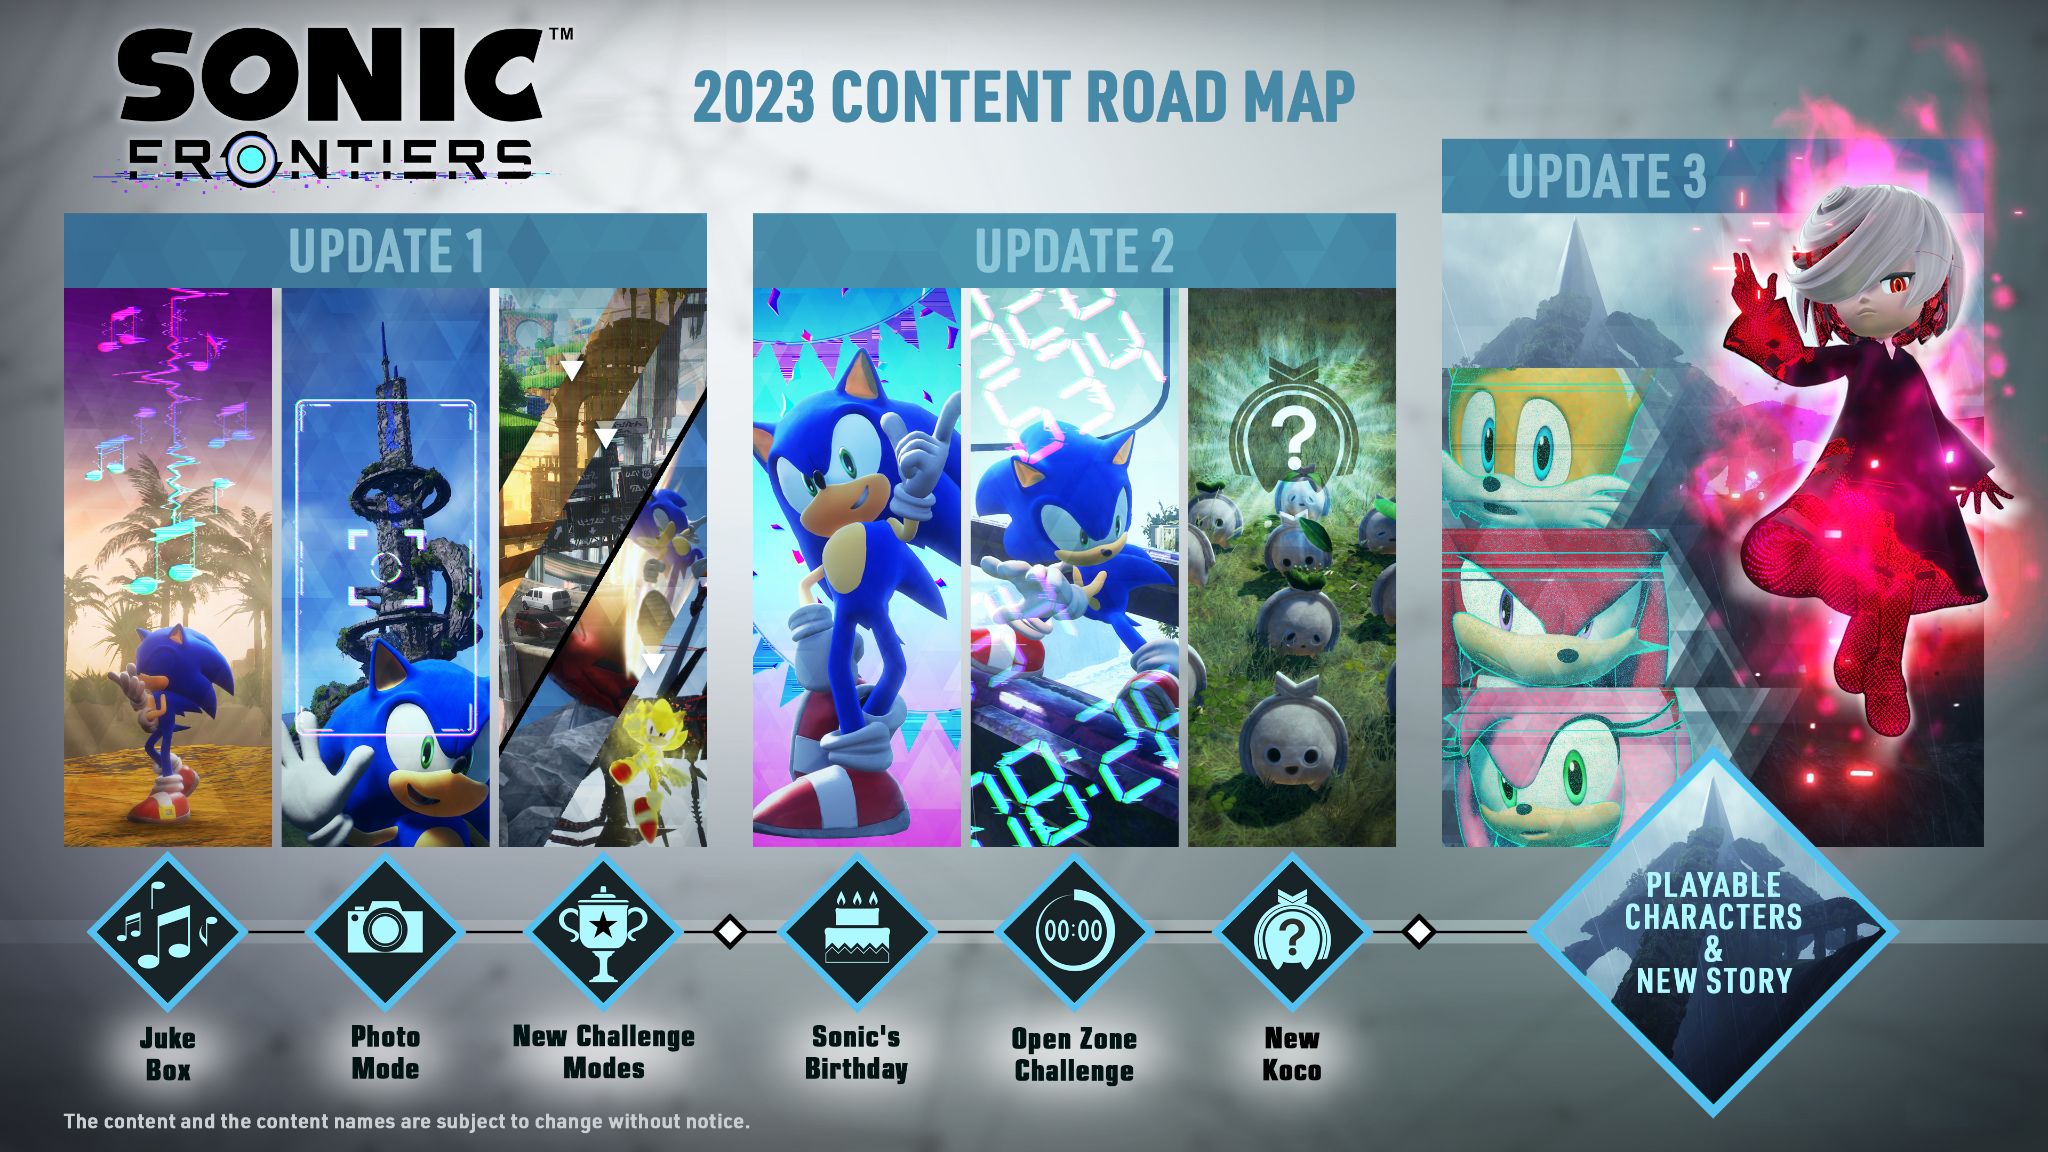 Sonic Frontiers free updates roadmap announced - additional